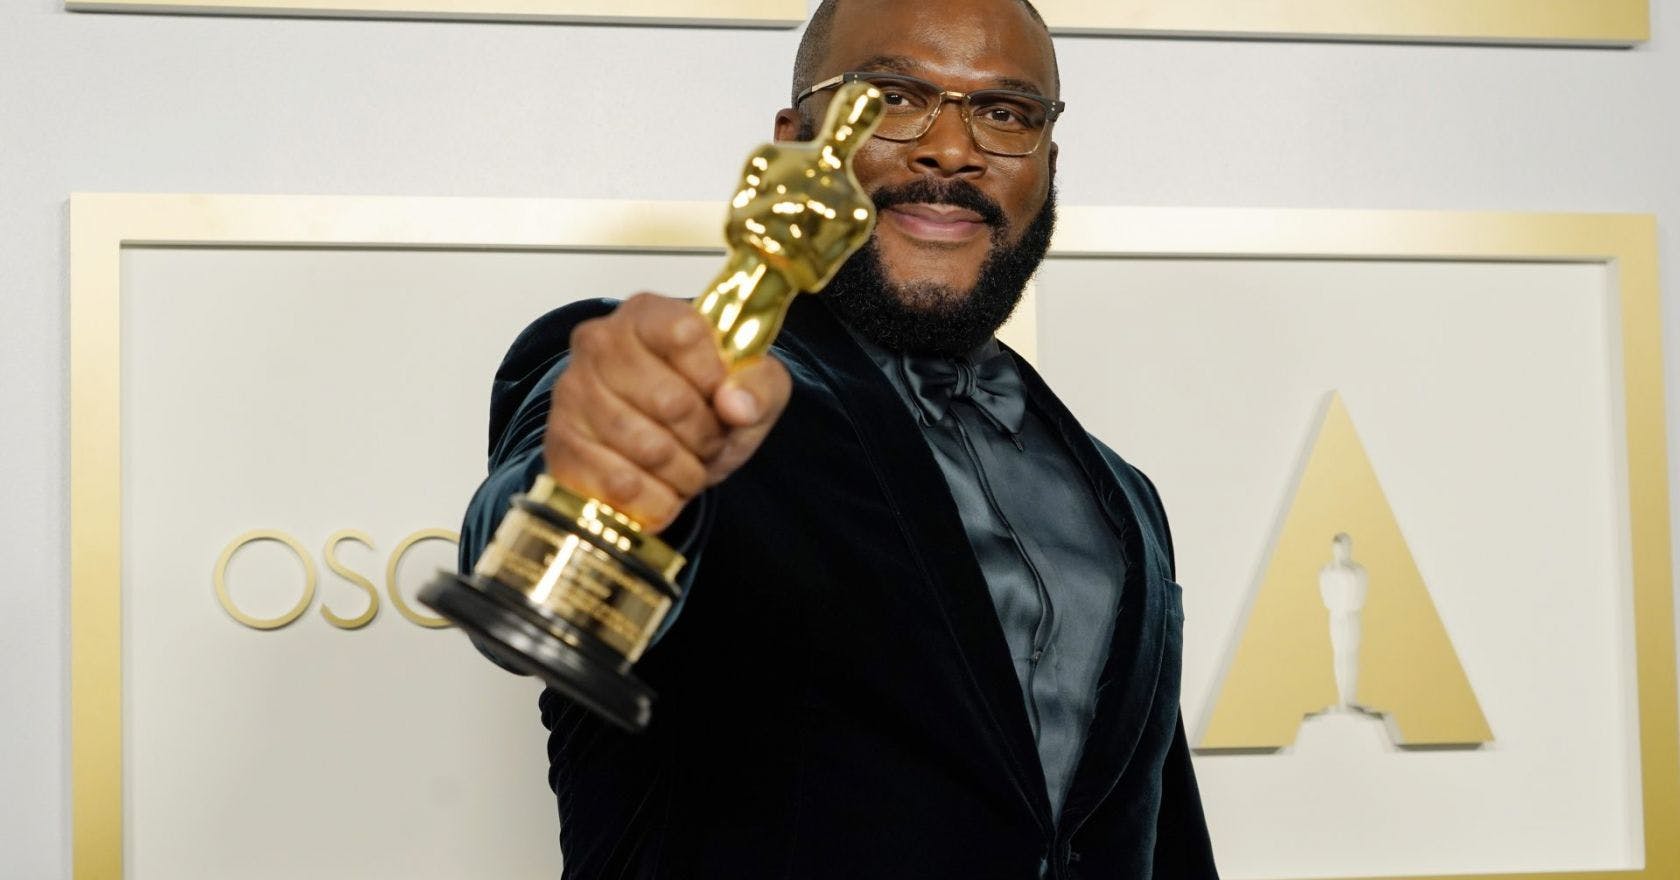 hy Tyler Perry’s viral Oscars speech has proven so divisive